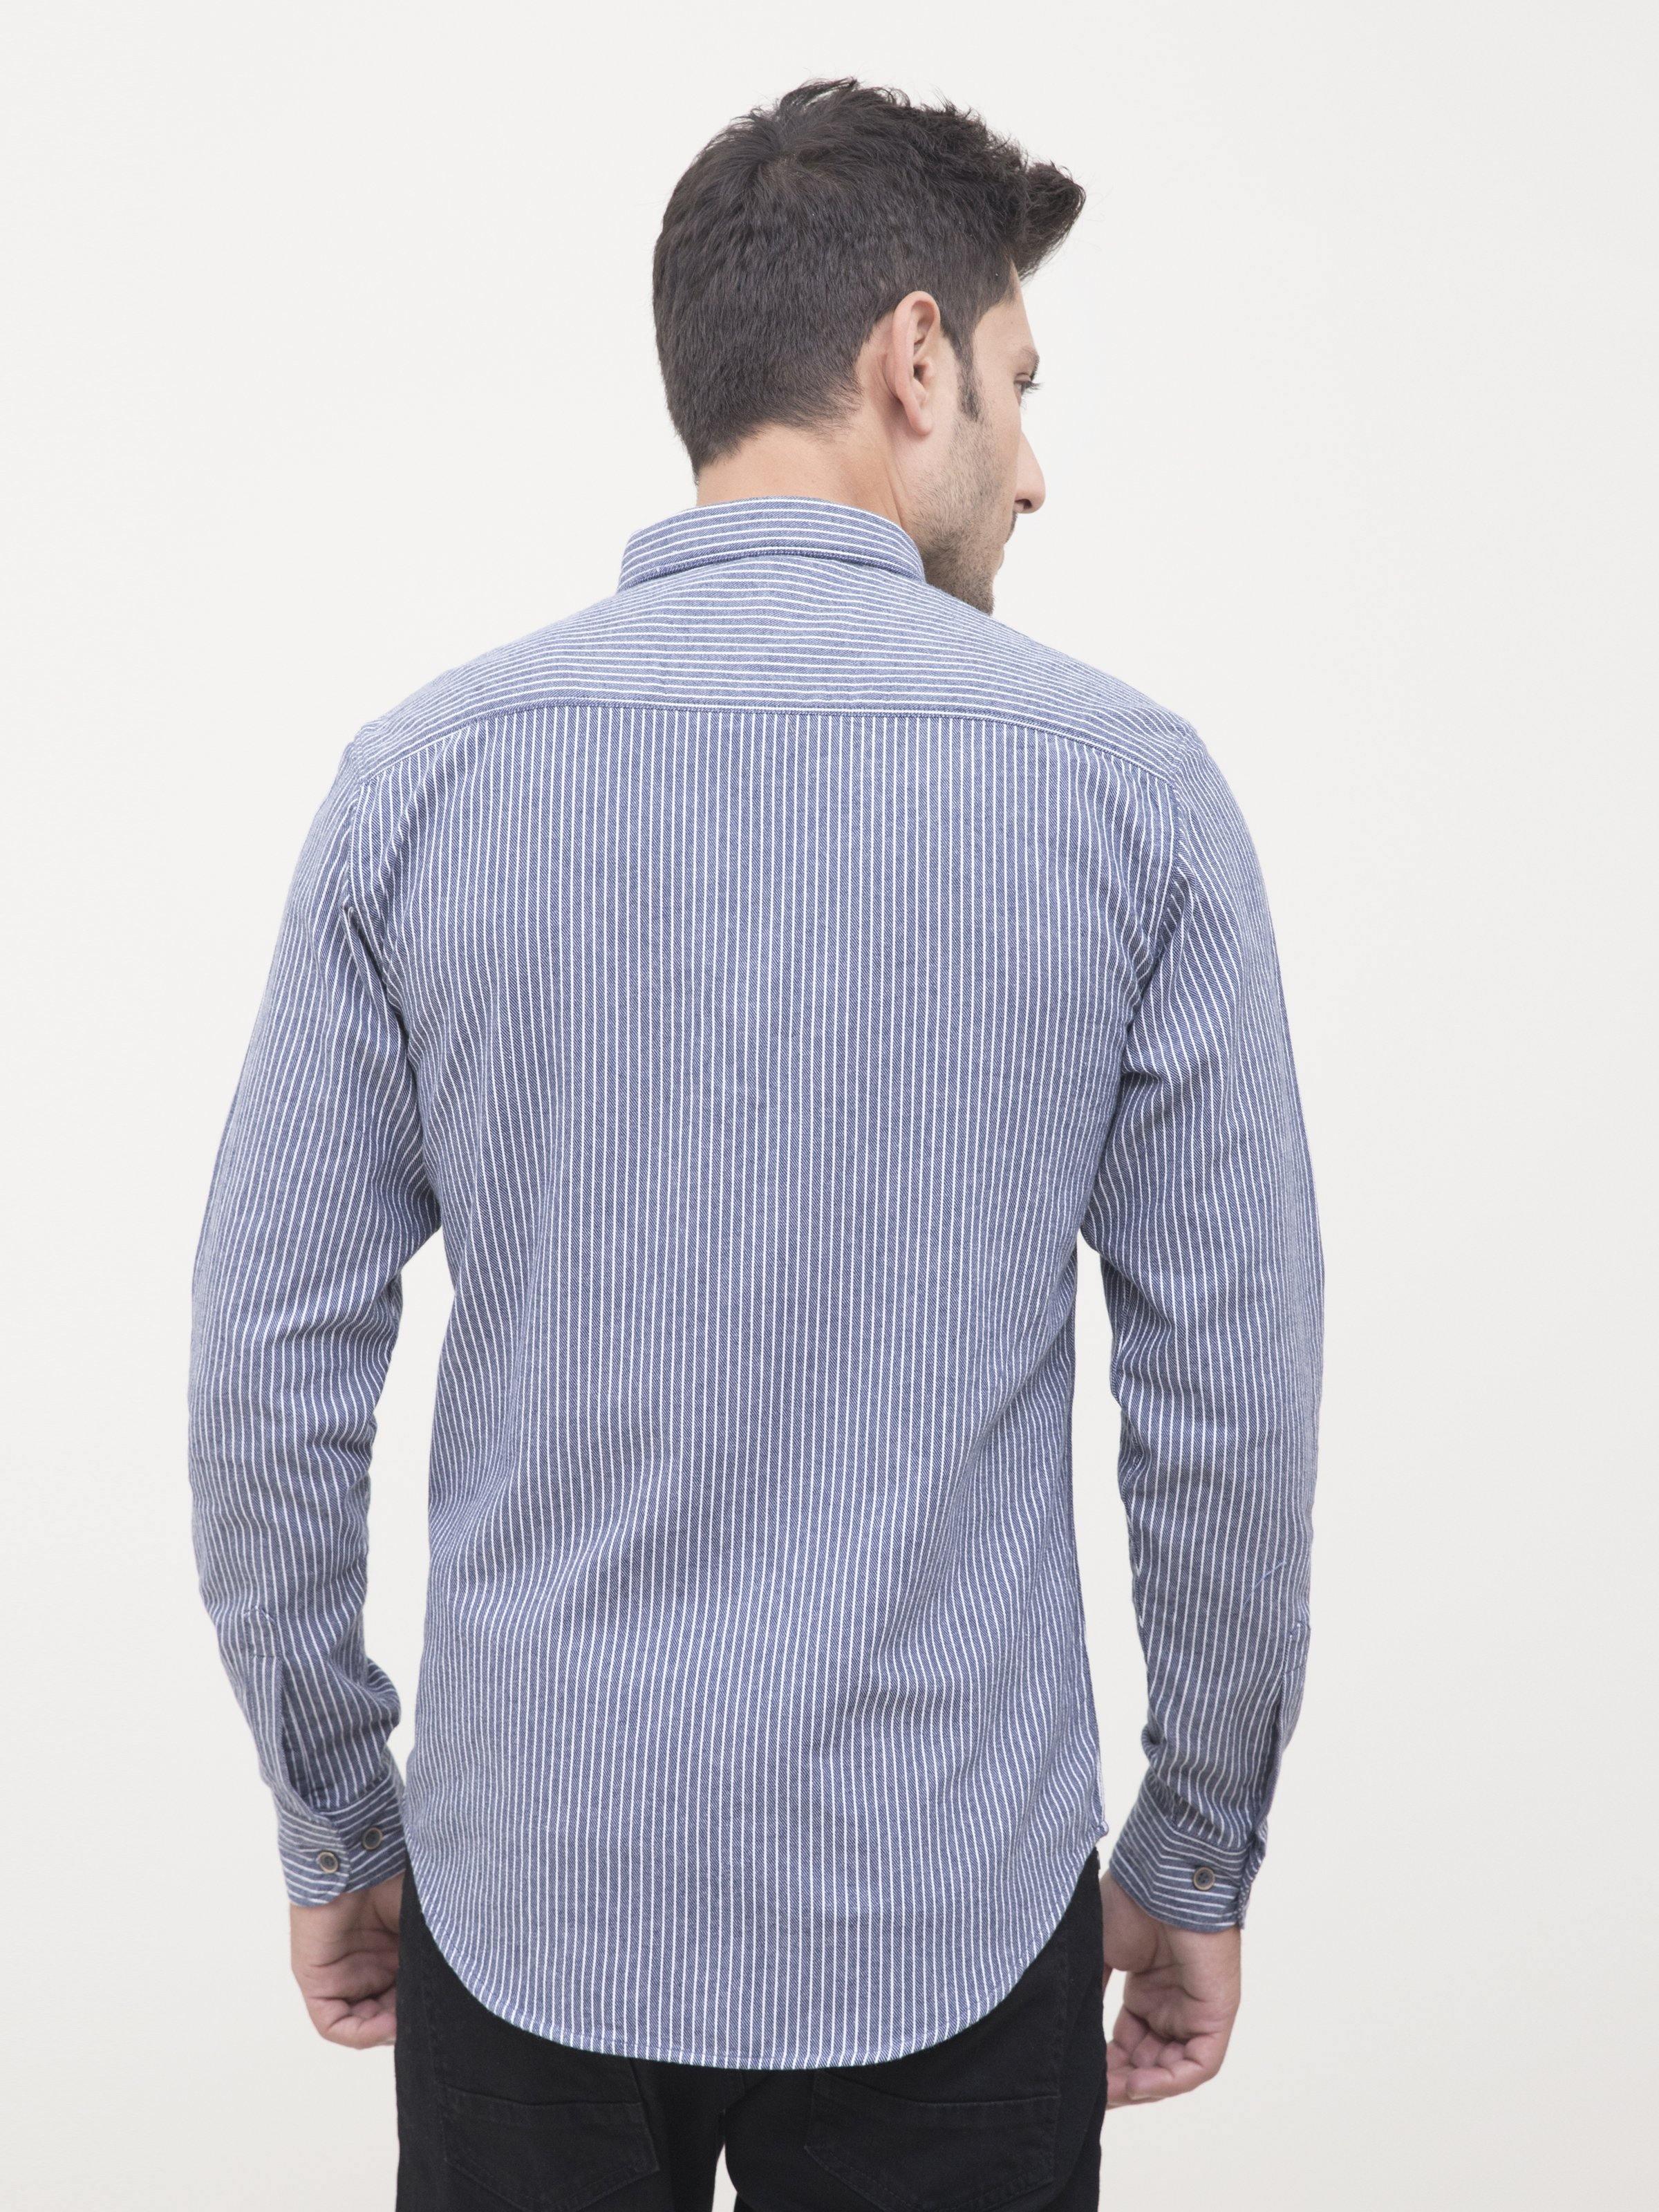 CASUAL SHIRT FULL SLEEVE STEEL GREY at Charcoal Clothing